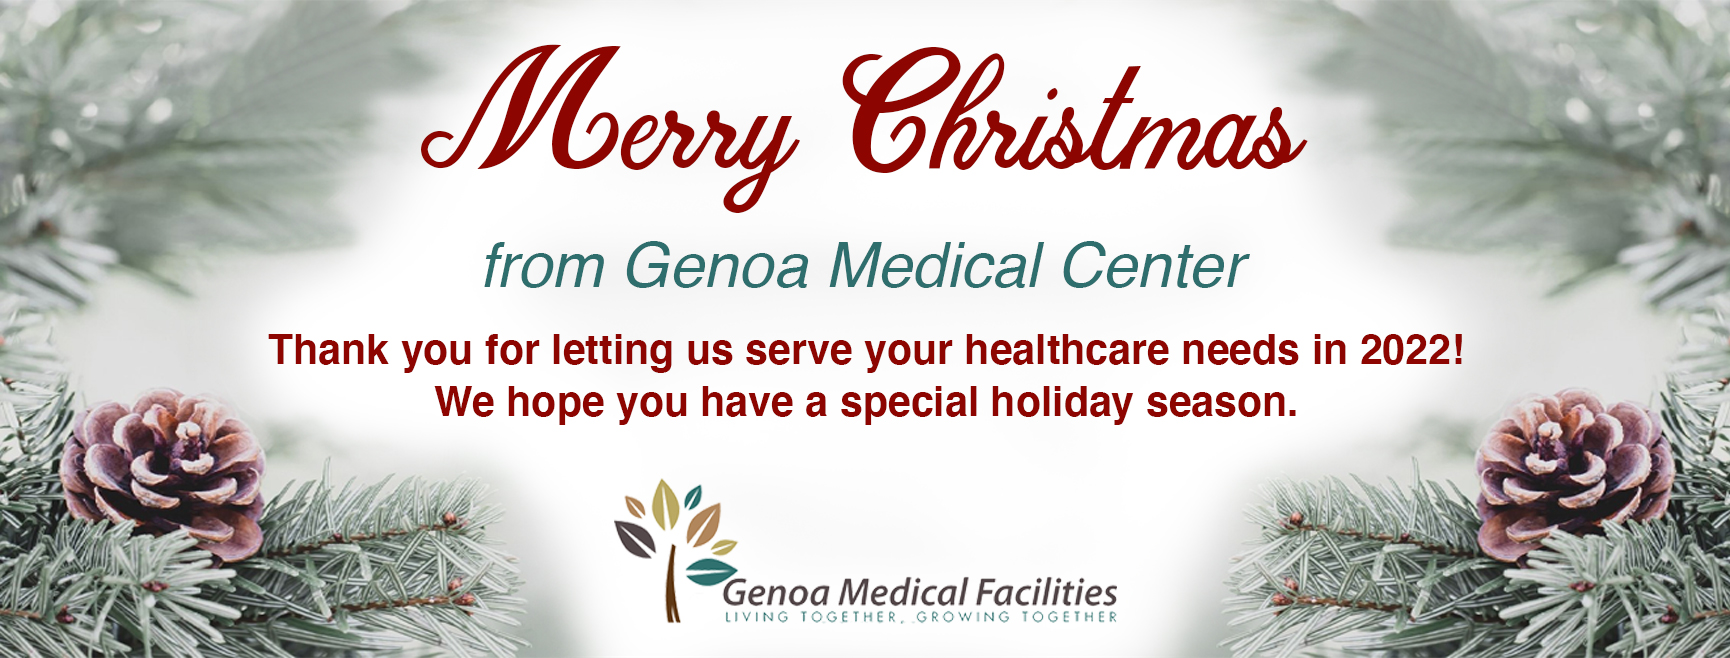 Merry Christmas from Genoa Medical Center Thank you for letting us serve your healthcare needs in 2022!
We hope you have a special holiday season. with pinecones Christmas theme.